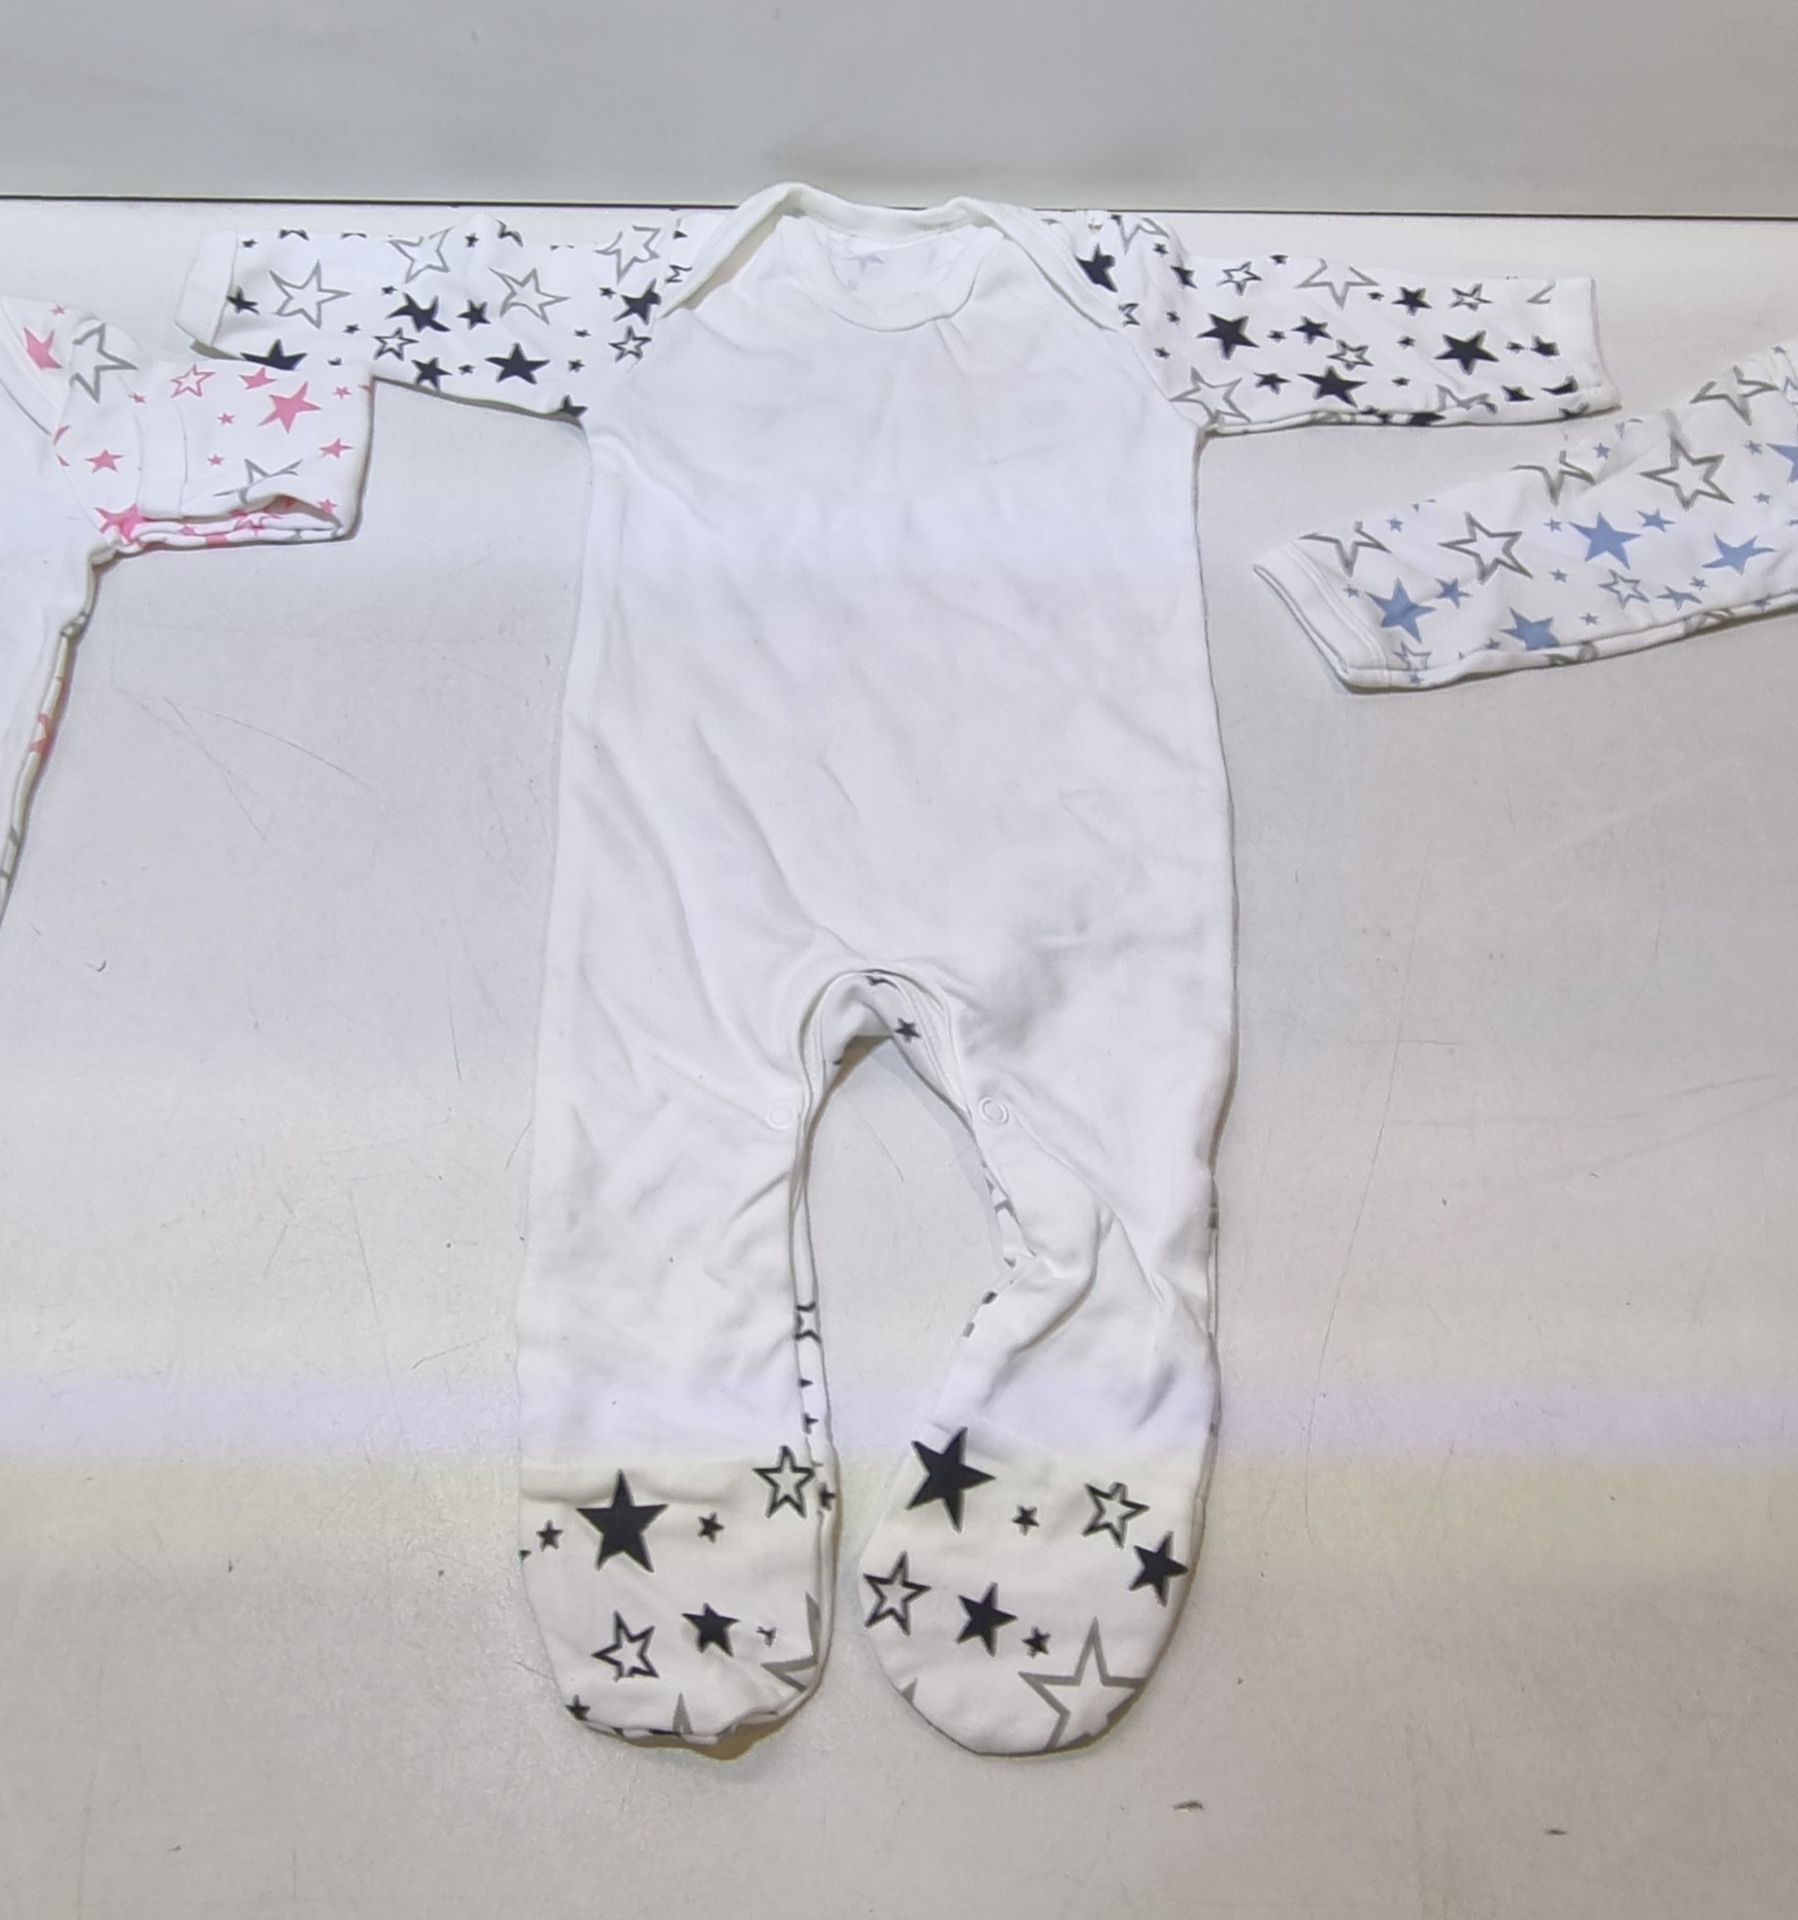 4 x Dinosaur/Star Babygrows in Various Colours & Sizes - Image 5 of 8